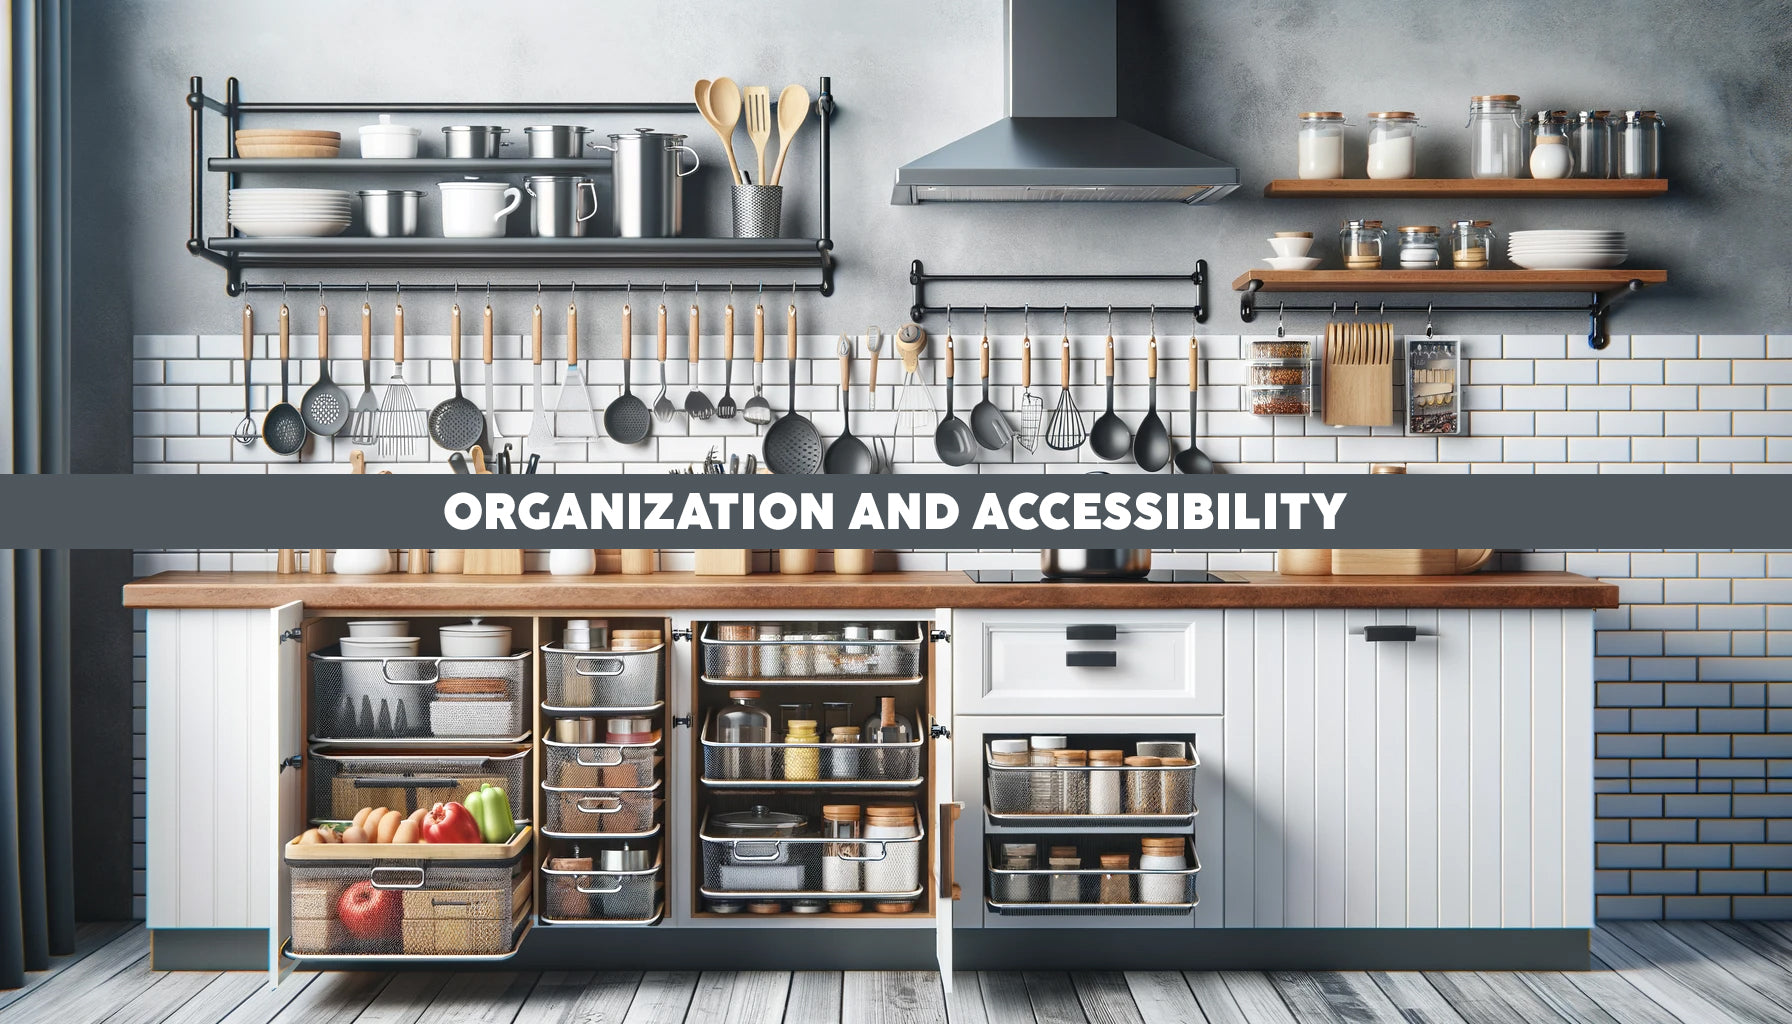 Our Shopify store brings you an array of innovative products designed to infuse harmony and efficiency into your culinary space. From sleek drawer dividers and modular utensil holders to space-saving hanging racks and easy-access pantry organizers